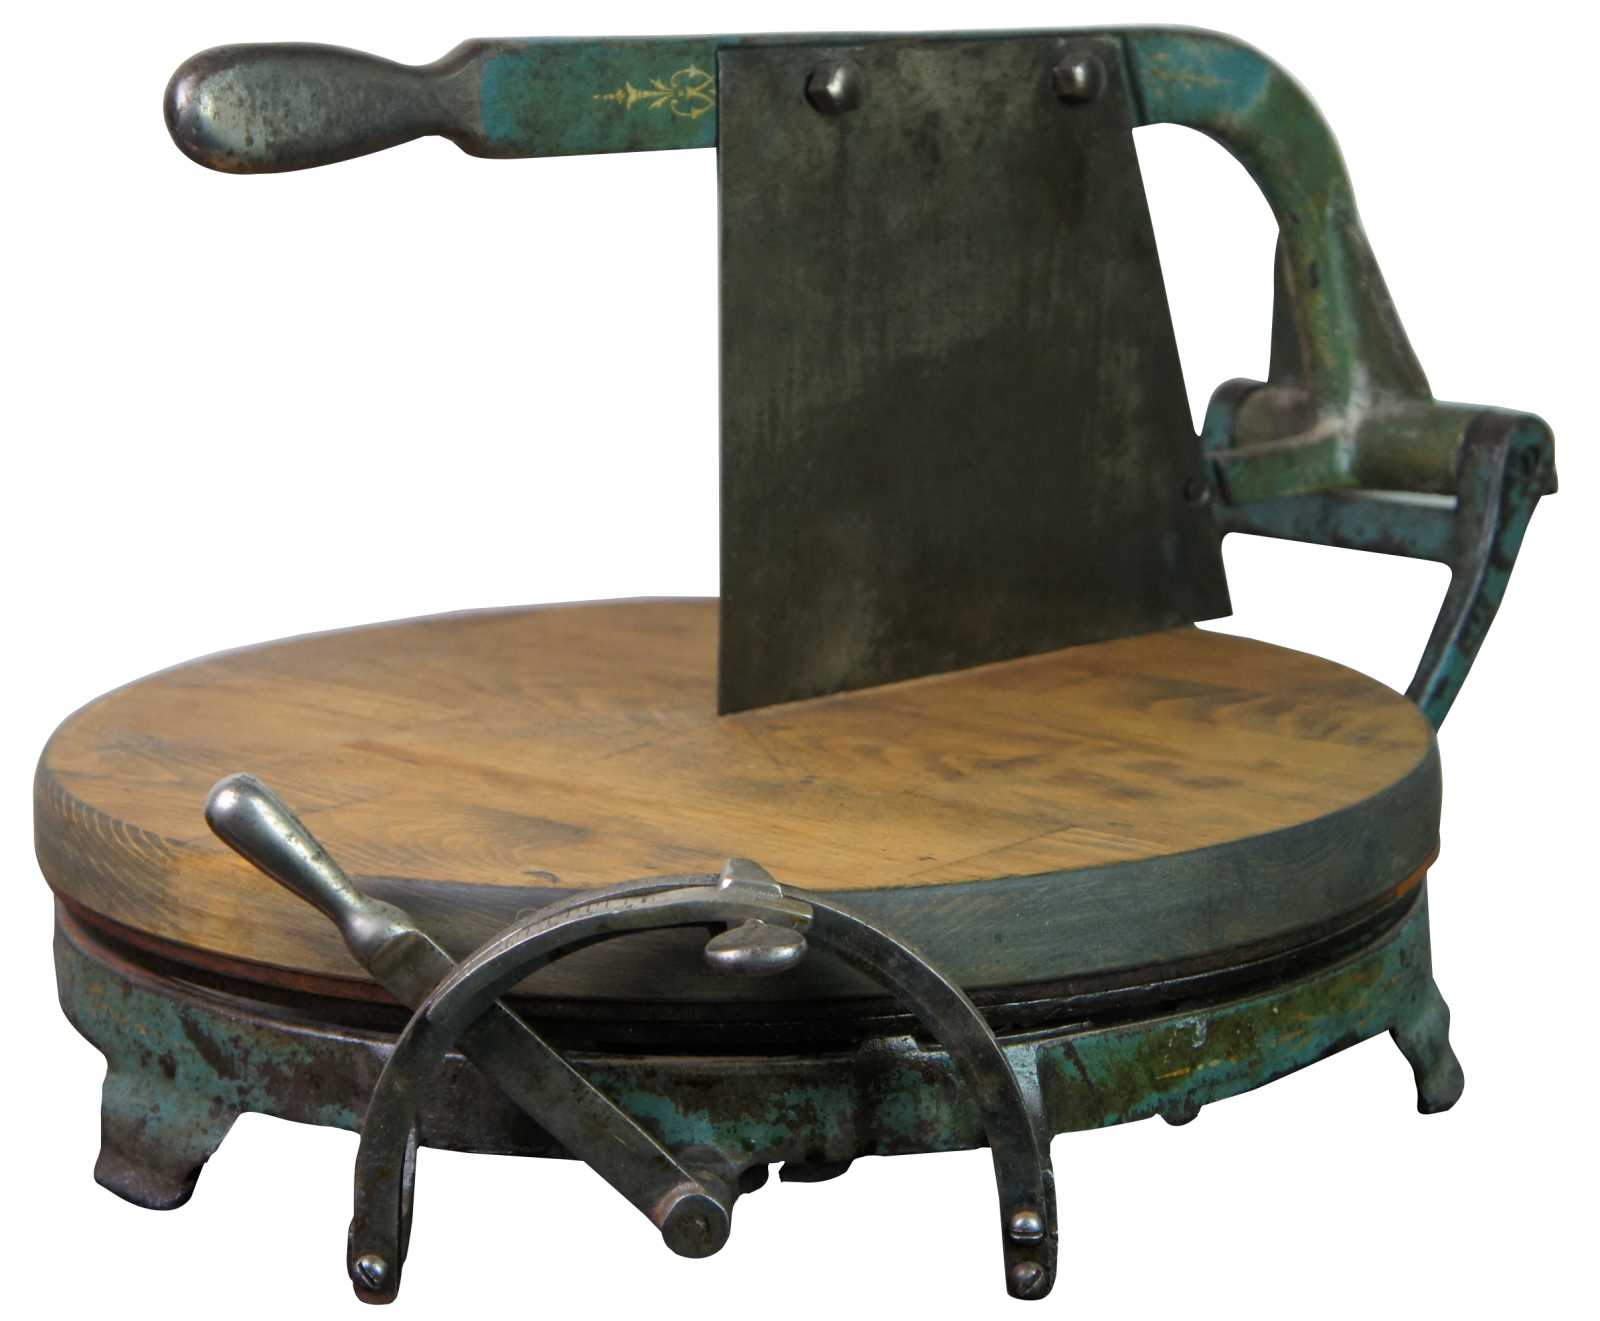 ANTIQUE CHEESE WHEEL CUTTER - Able Auctions